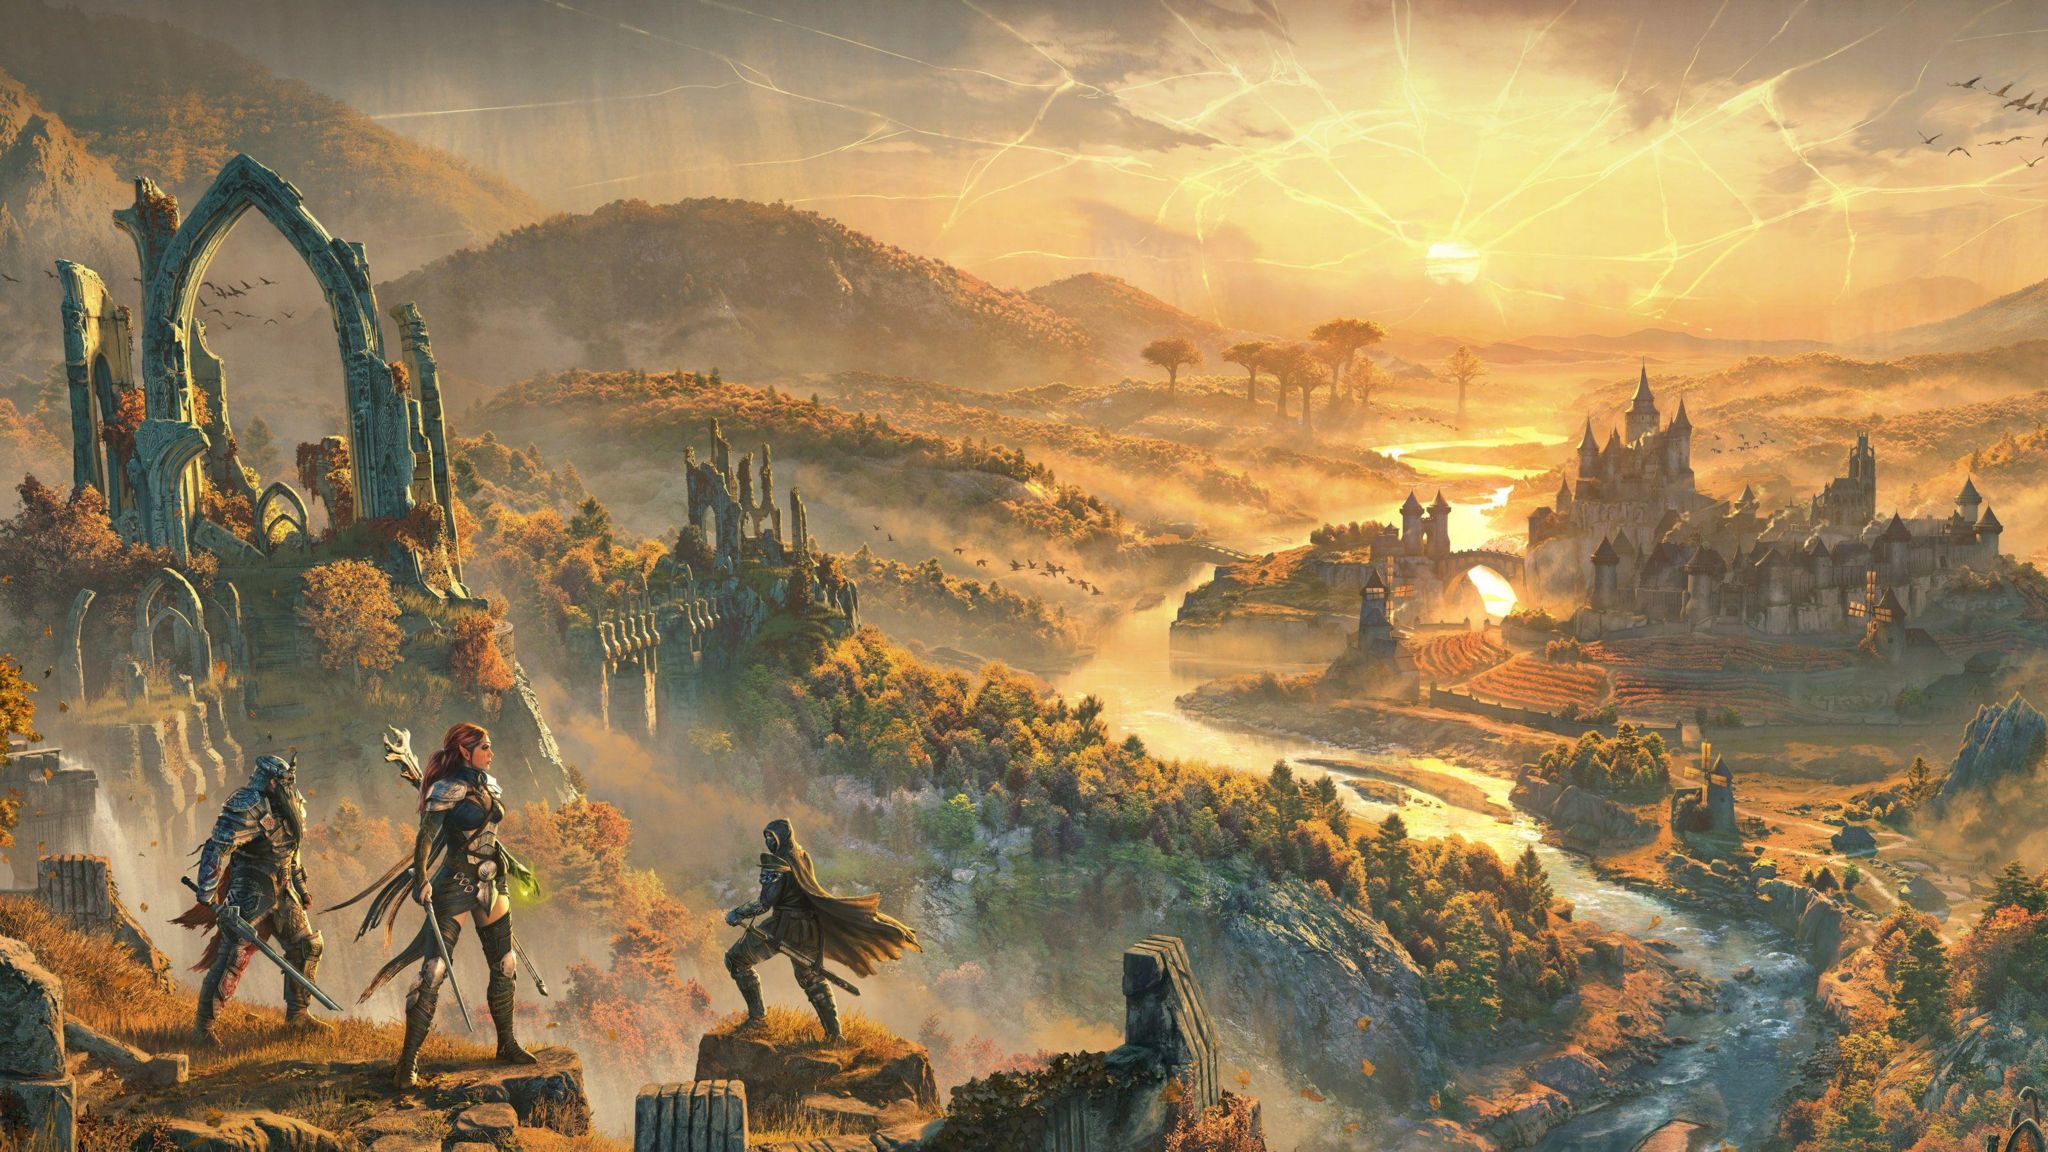 A painting shows three characters wearing armour and holding swords standing on a high hill overlooking a vast landscape filled with forested areas and Medieval style buildings. In the distance a town featuring tall, turetted towers is visible. A sunset glow permeates the scene, adding to the fantasy quality.